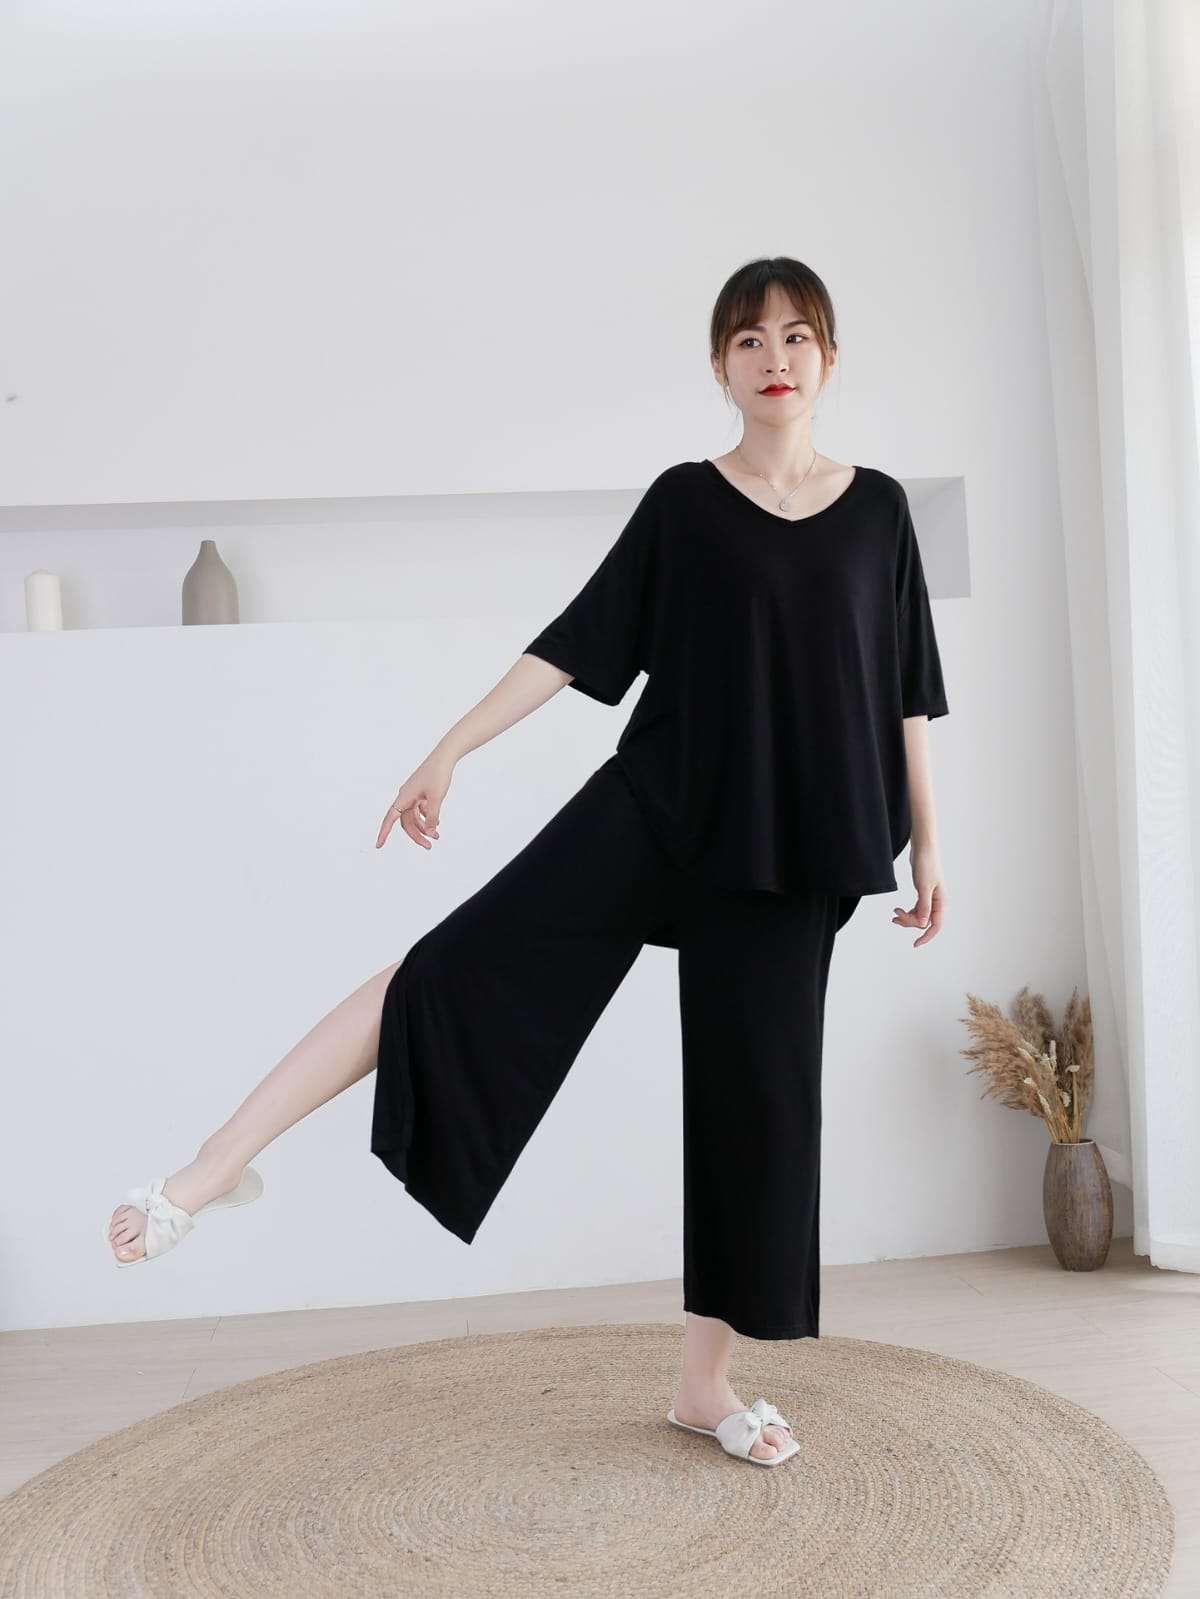 Plain Black V Neck Quarter Sleeves with Cut Style Pajama Night Suit for Her (RX-82)